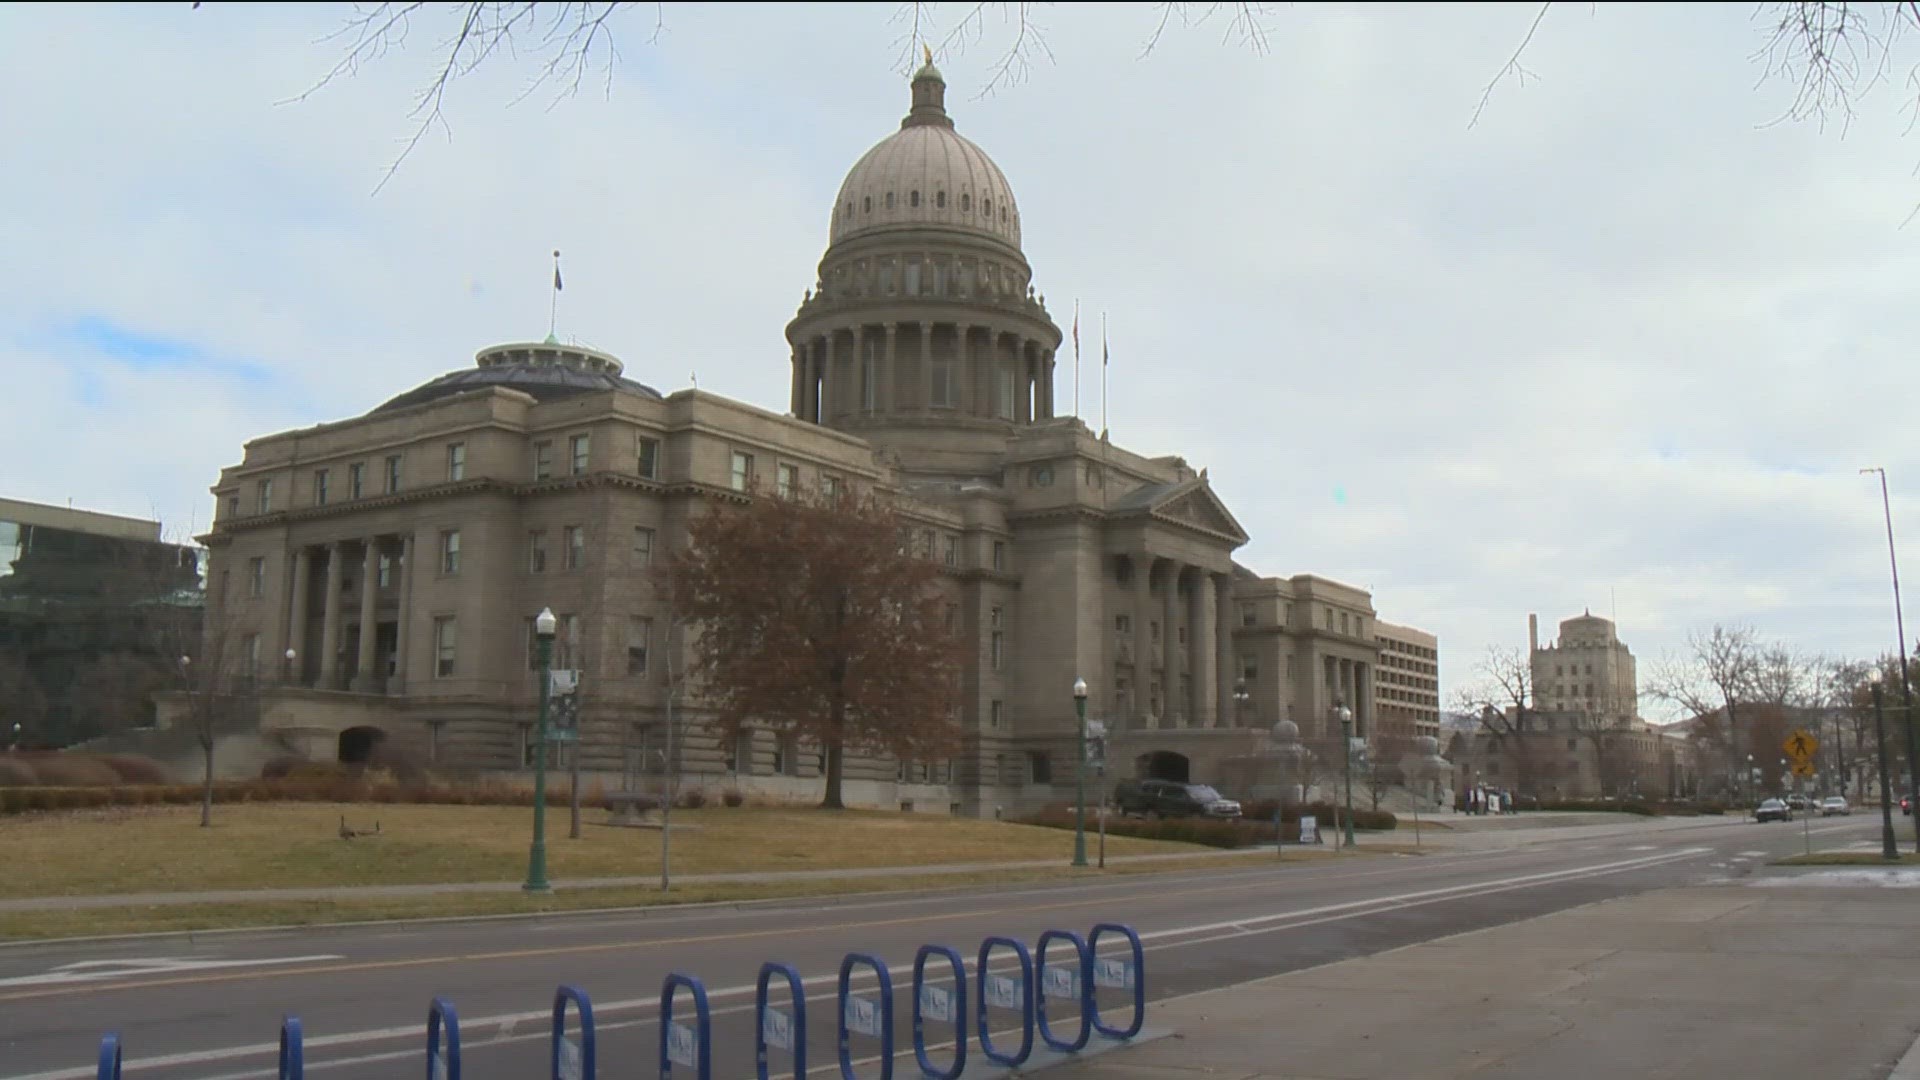 Idaho State Capitol was among several state capitols evacuated Wednesday due to threats, but no dangerous items were found.